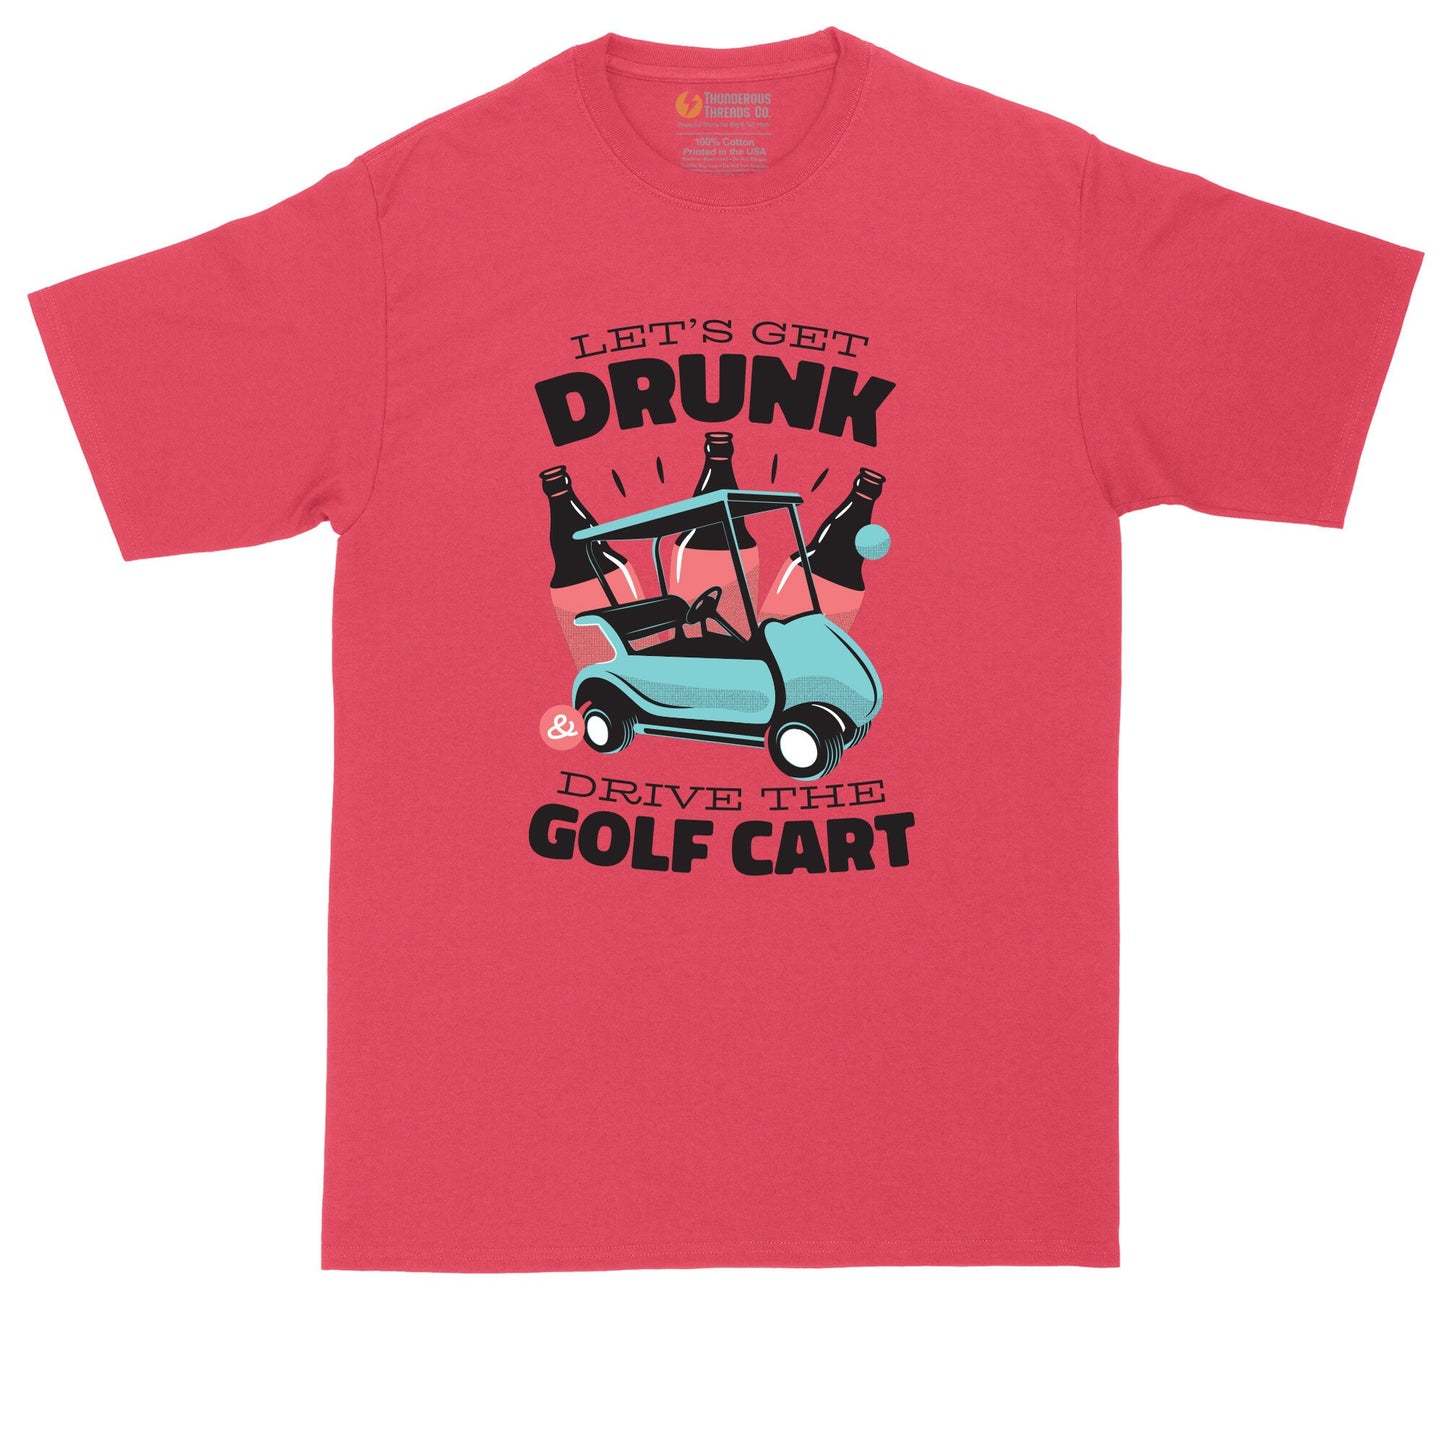 Lets Get Drunk and Drive the Golf Cart | Mens Big a& Tall T-Shirt